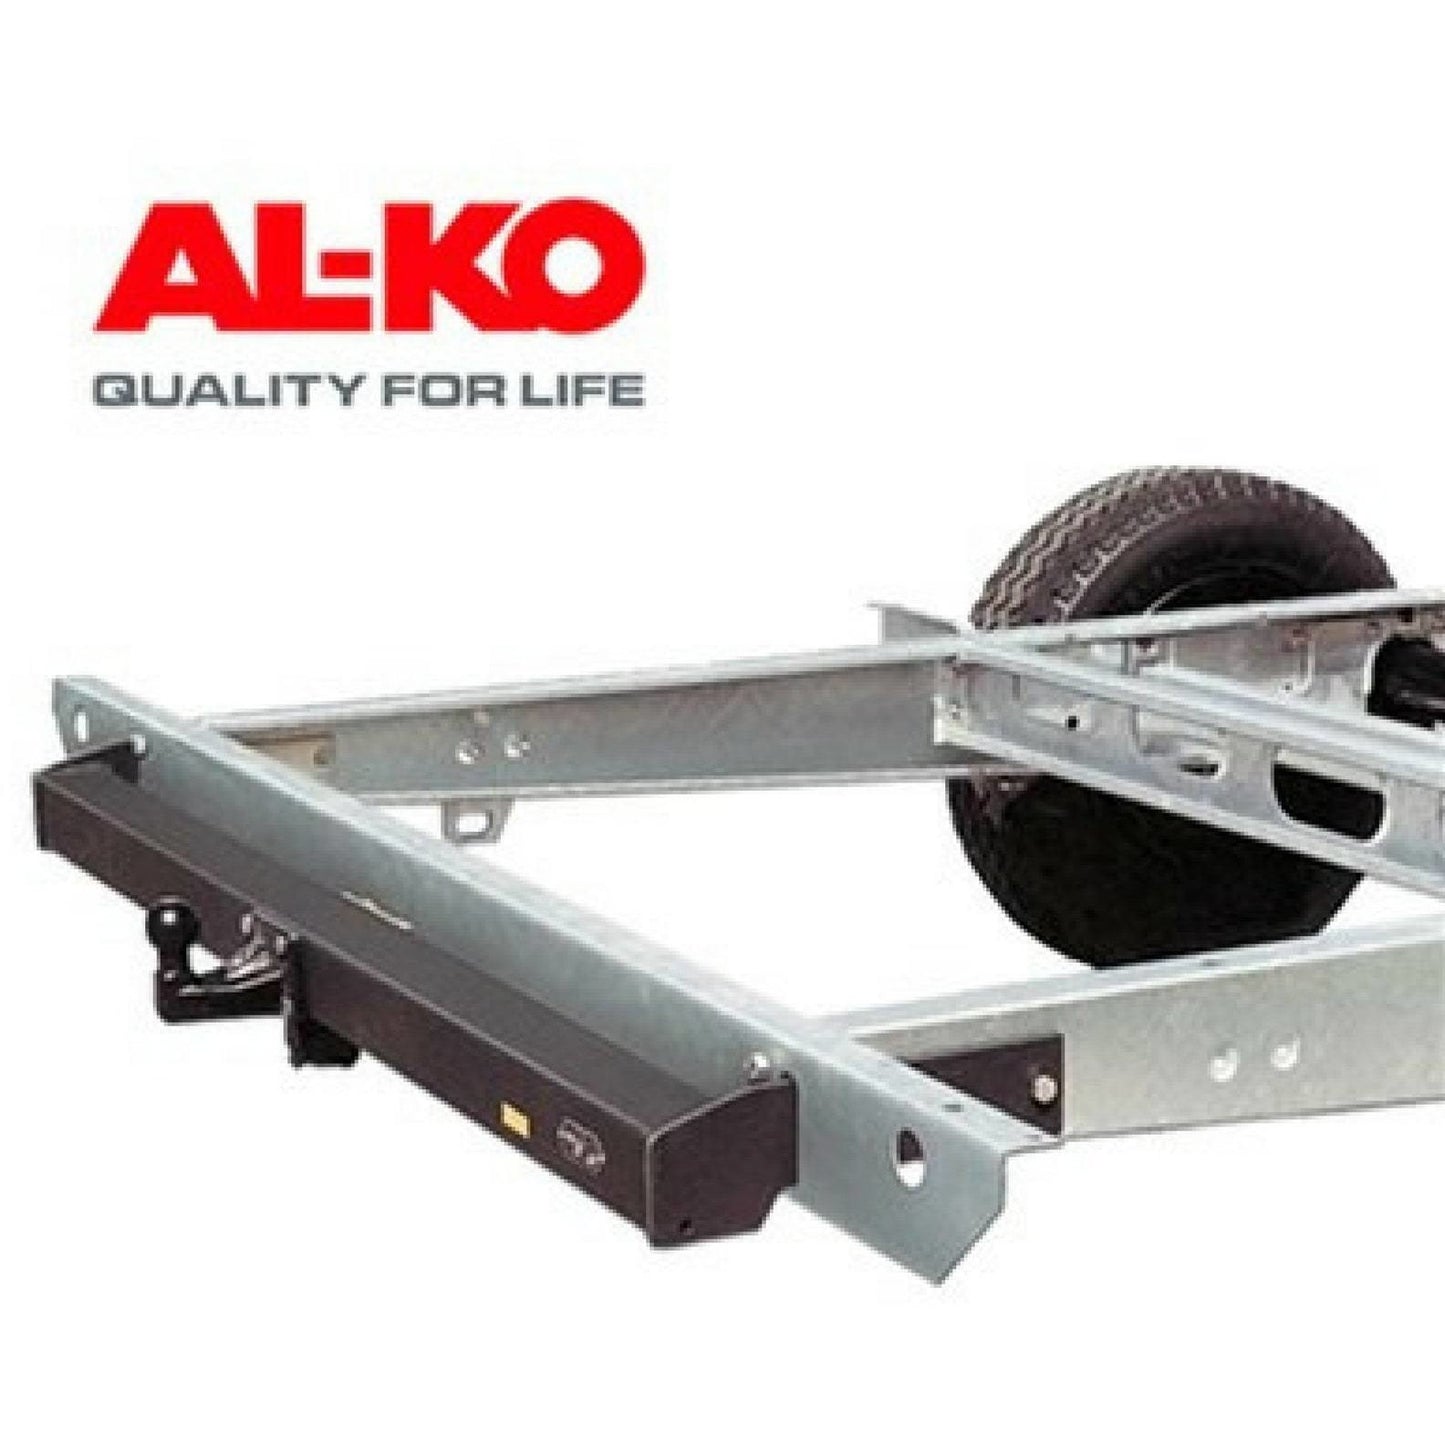 ALKO Towbar Assembly (1620153) made by ALKO. A Towing sold by Quality Caravan Awnings